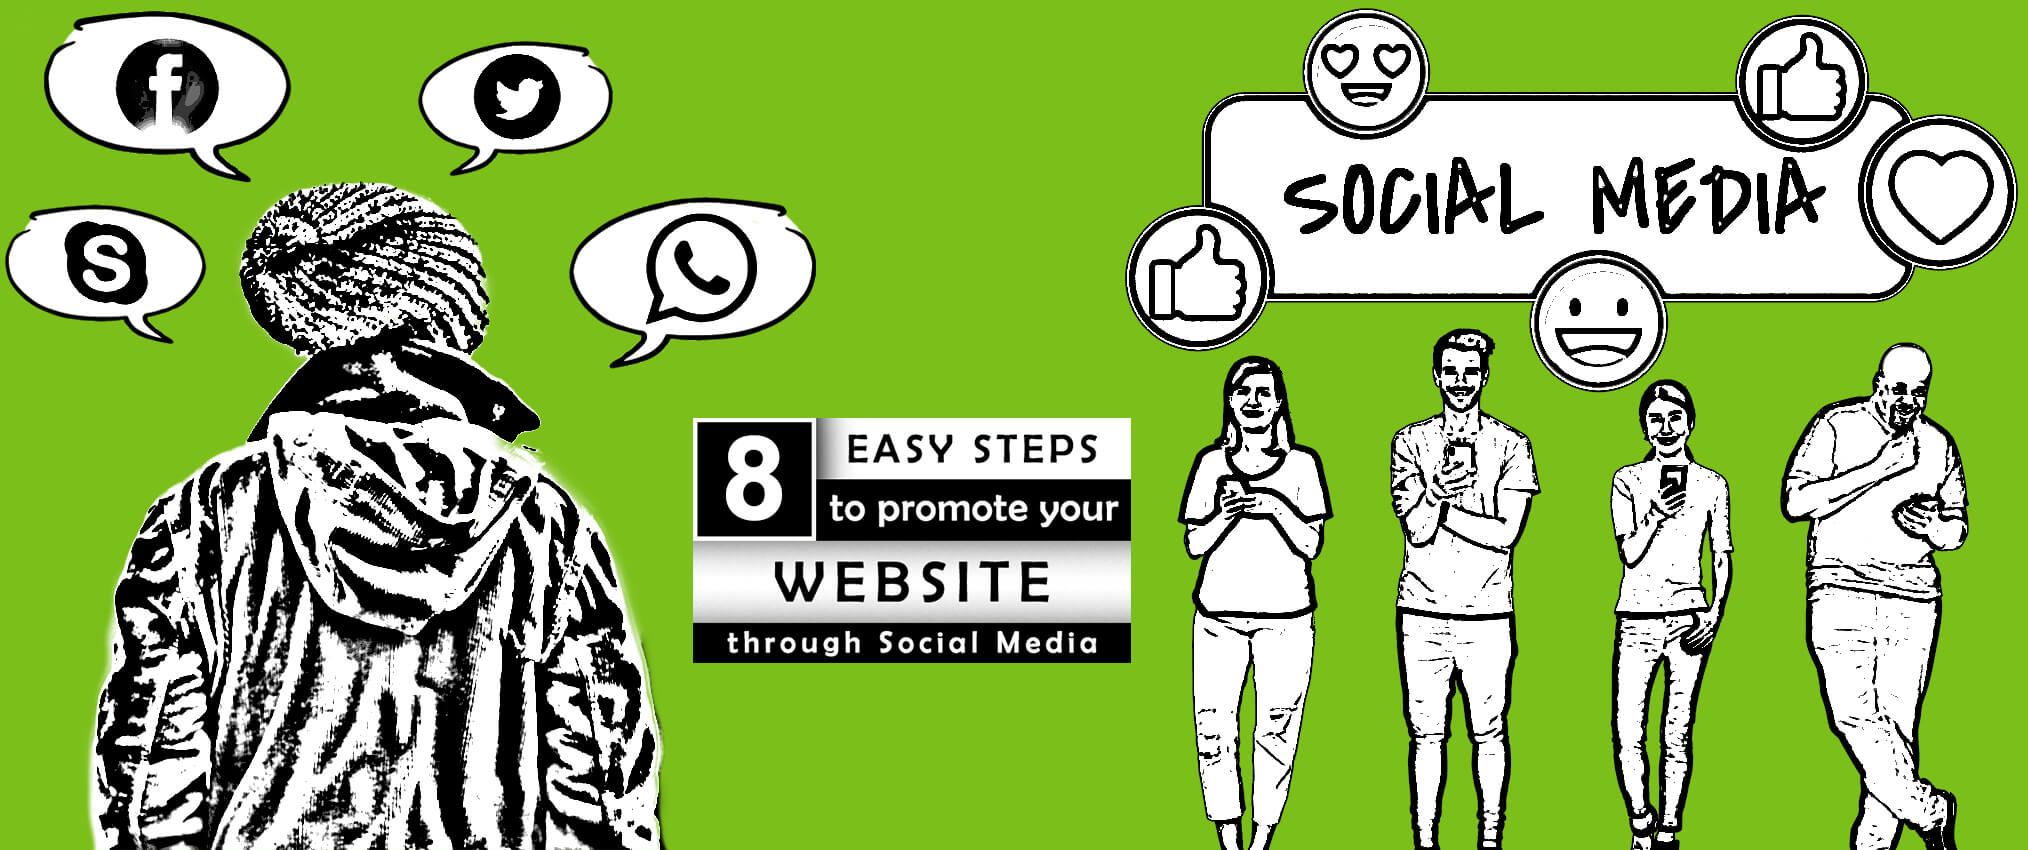 8 Easy tips to promote your website through Social Media